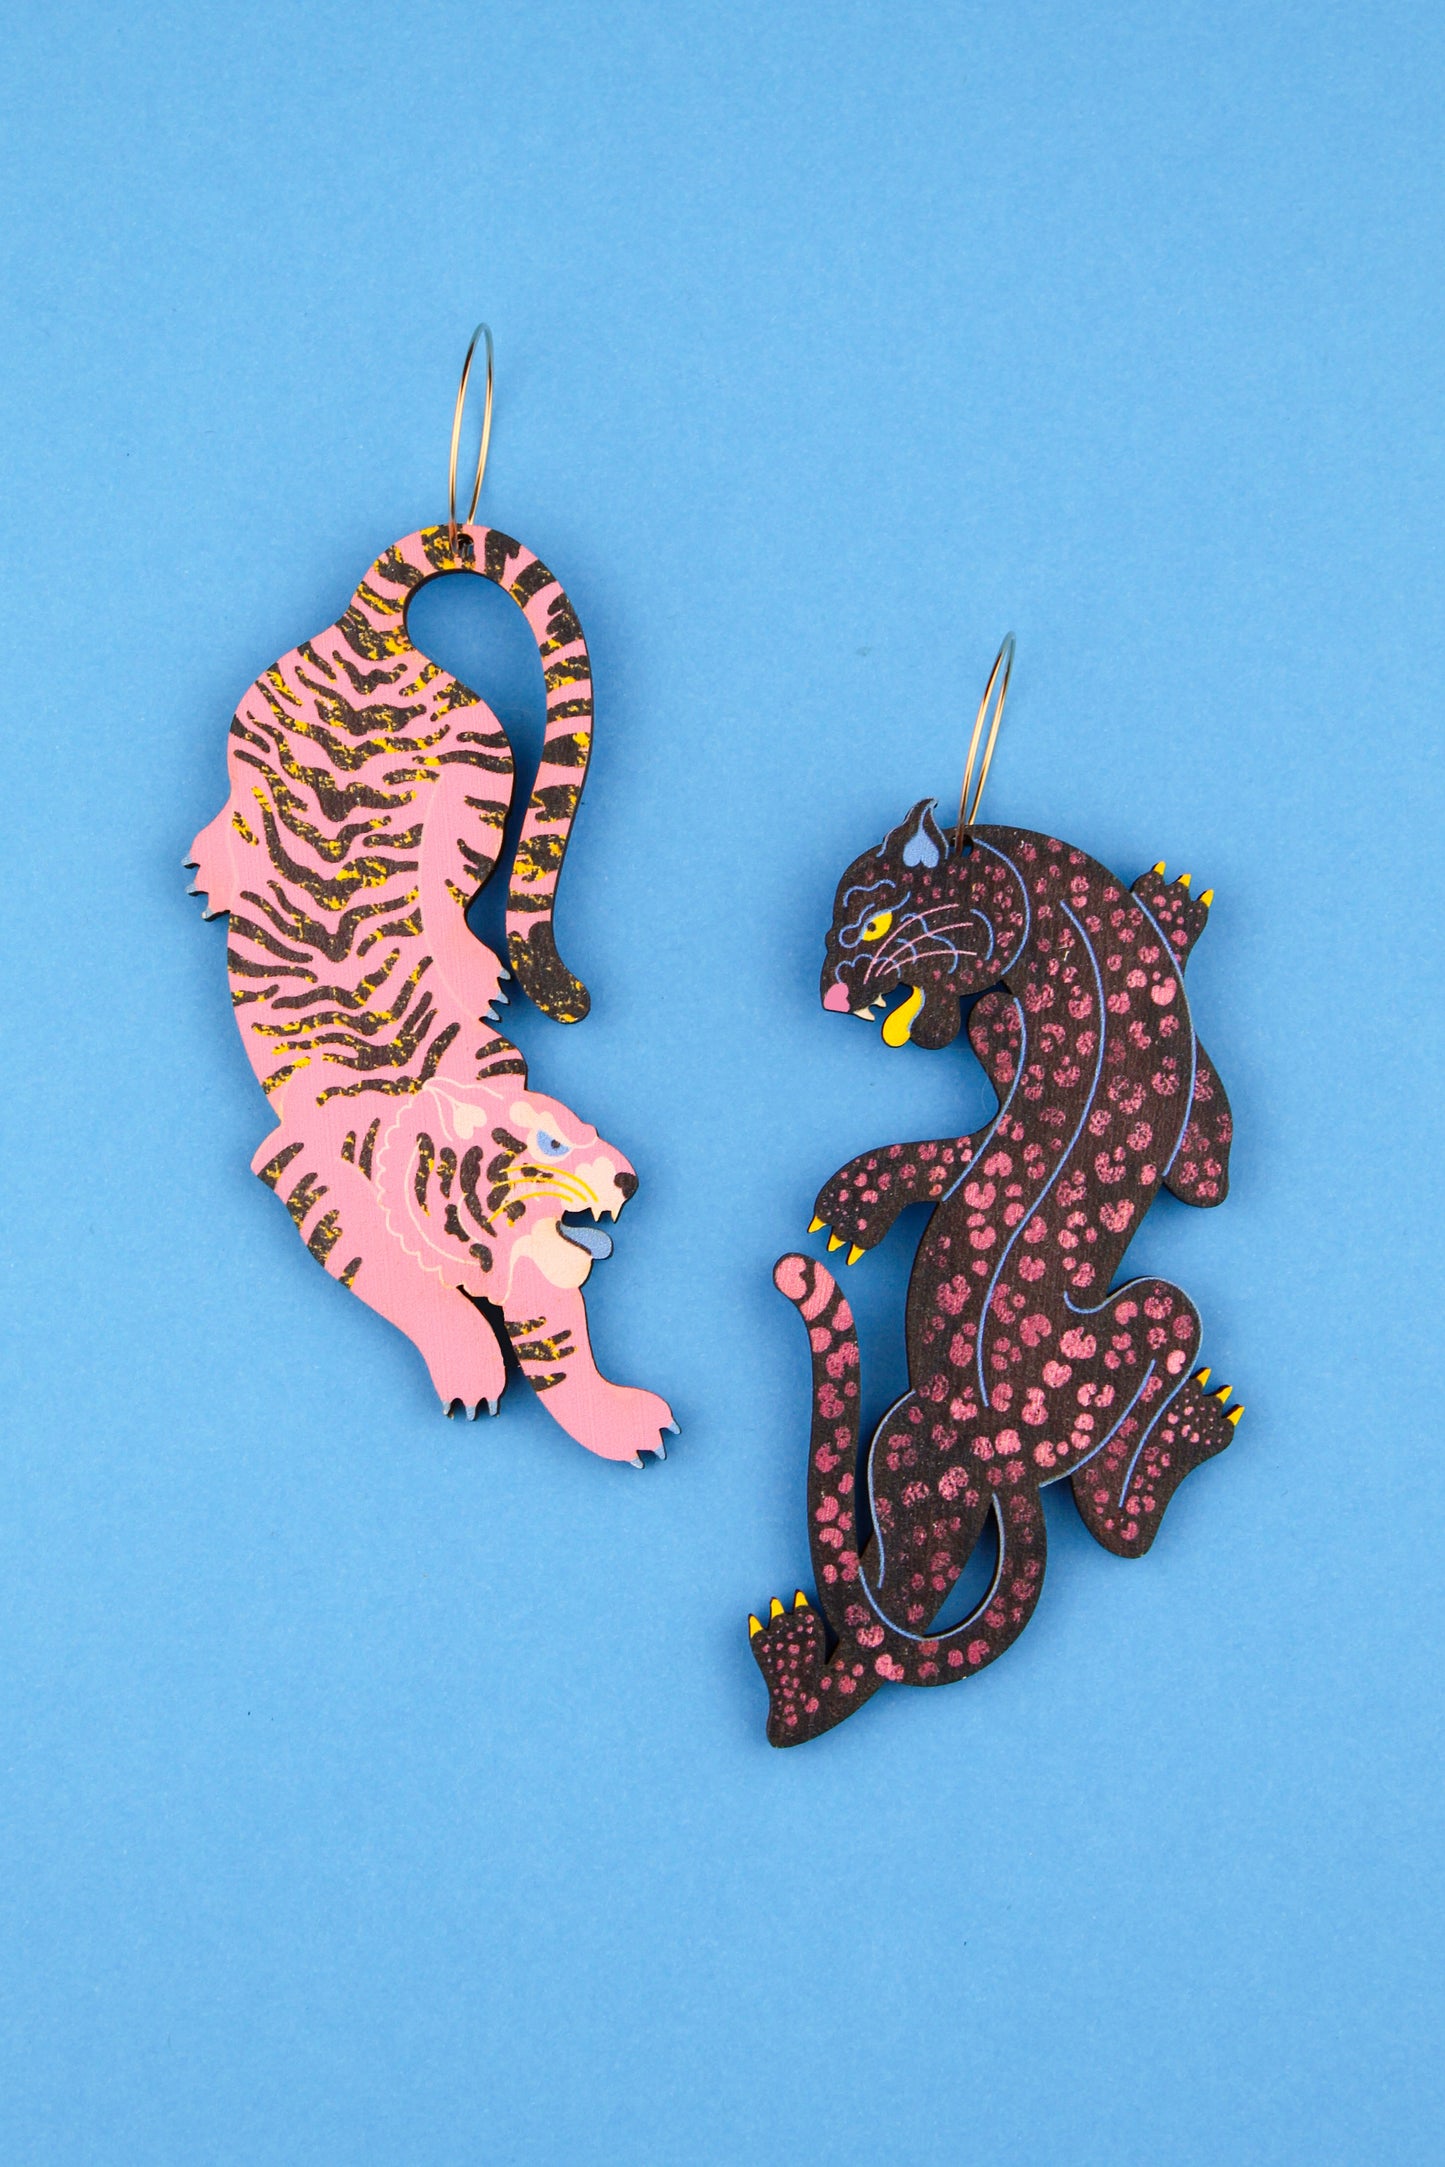 Tiger Vs Panther earrings